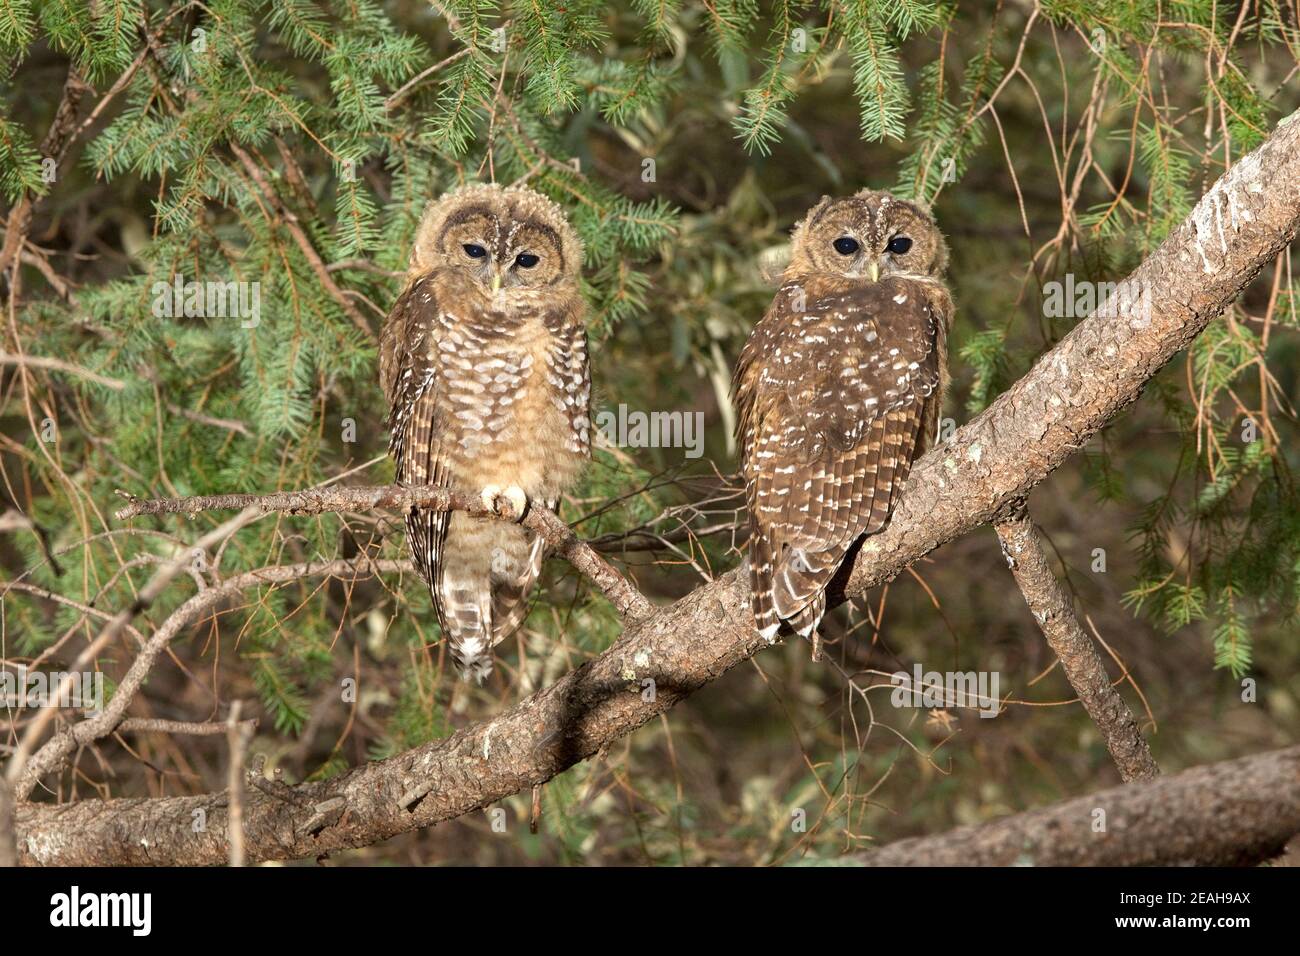 Mexican Spotted Owl fledglings, Strix occidentalis, perched in pine tree. Stock Photo